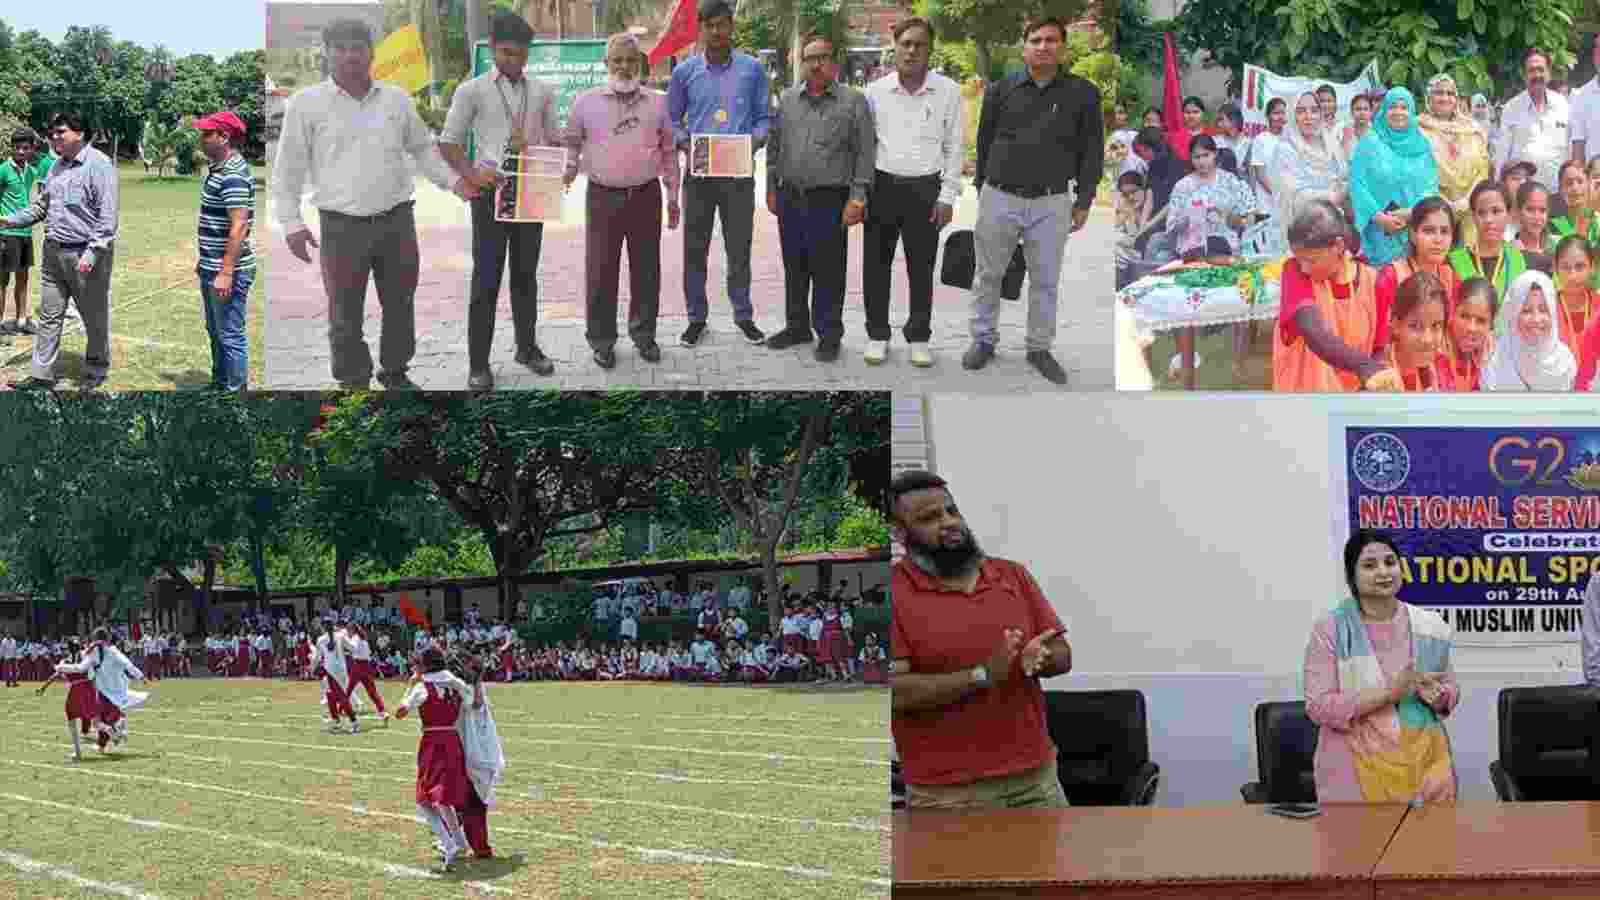 National Sports Day Celebration at AMU: Have a look at the events